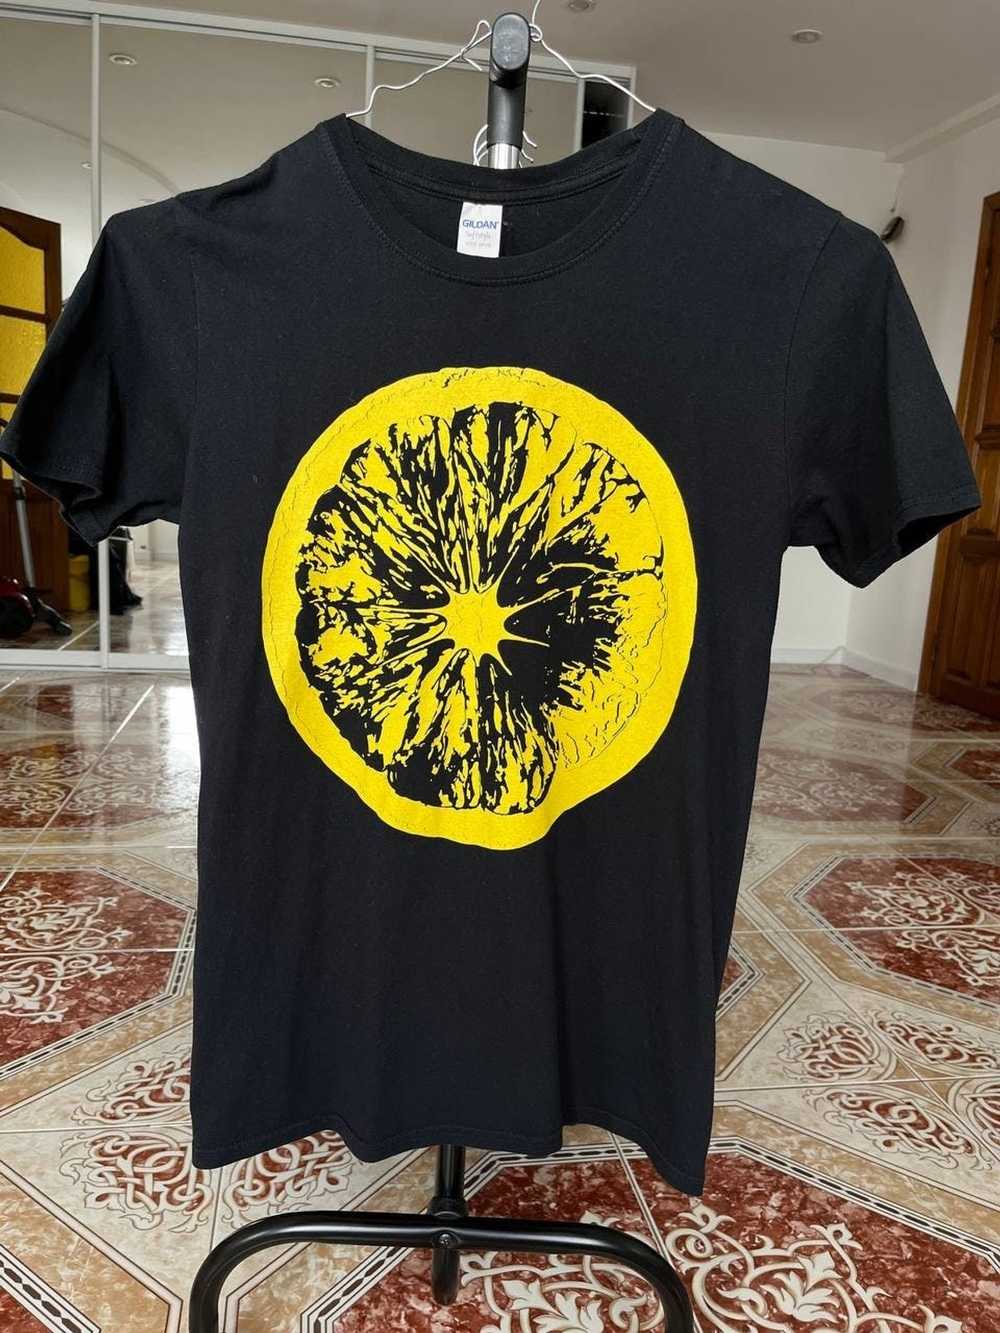 Band Tees × Vintage Vintage The Stone Roses T-shi… - image 1